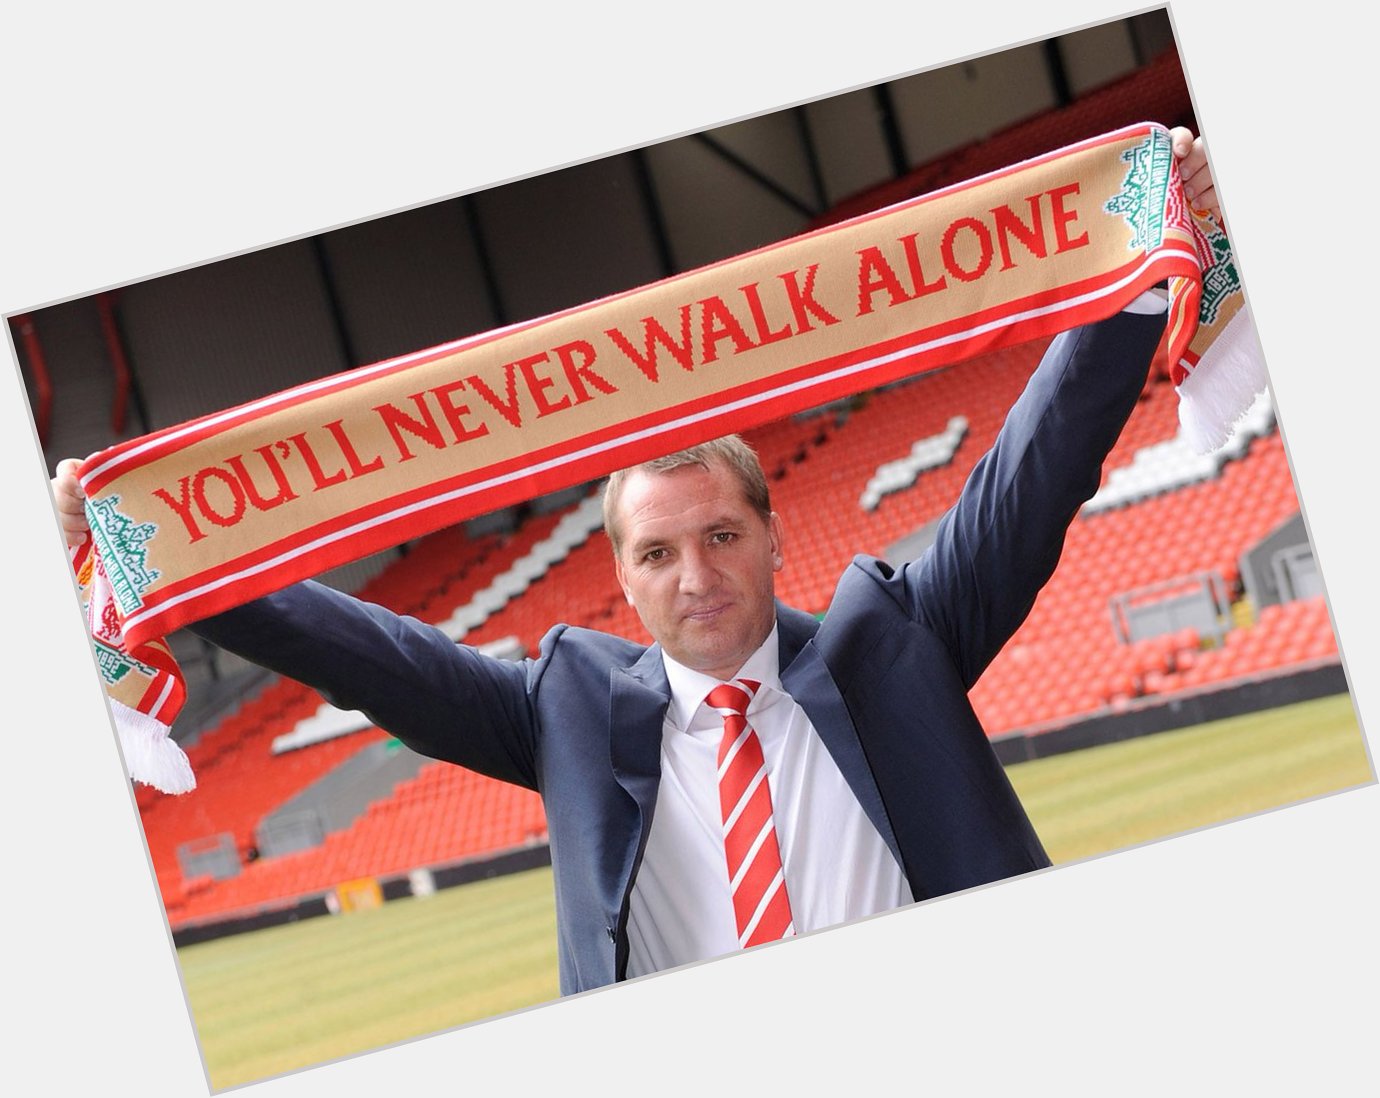 Happy Birthday to former Liverpool manager Brendan Rodgers who celebrates his 48th birthday today.  